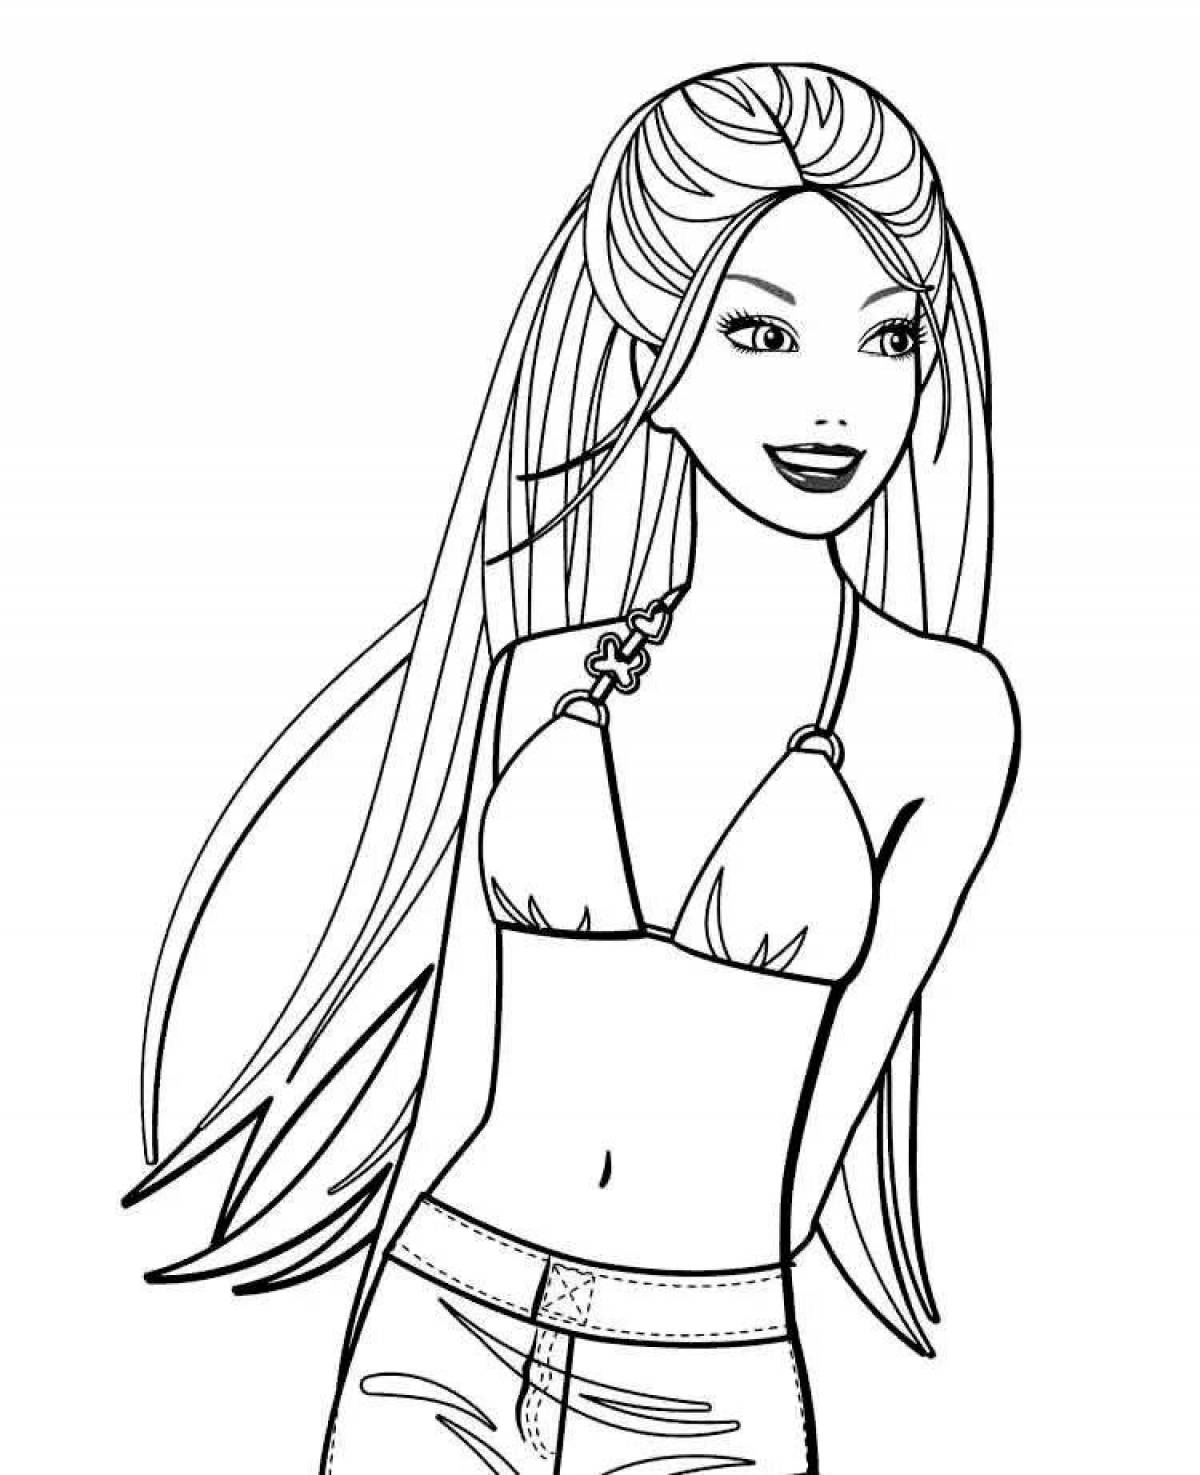 Exciting coloring of a girl in a bathing suit